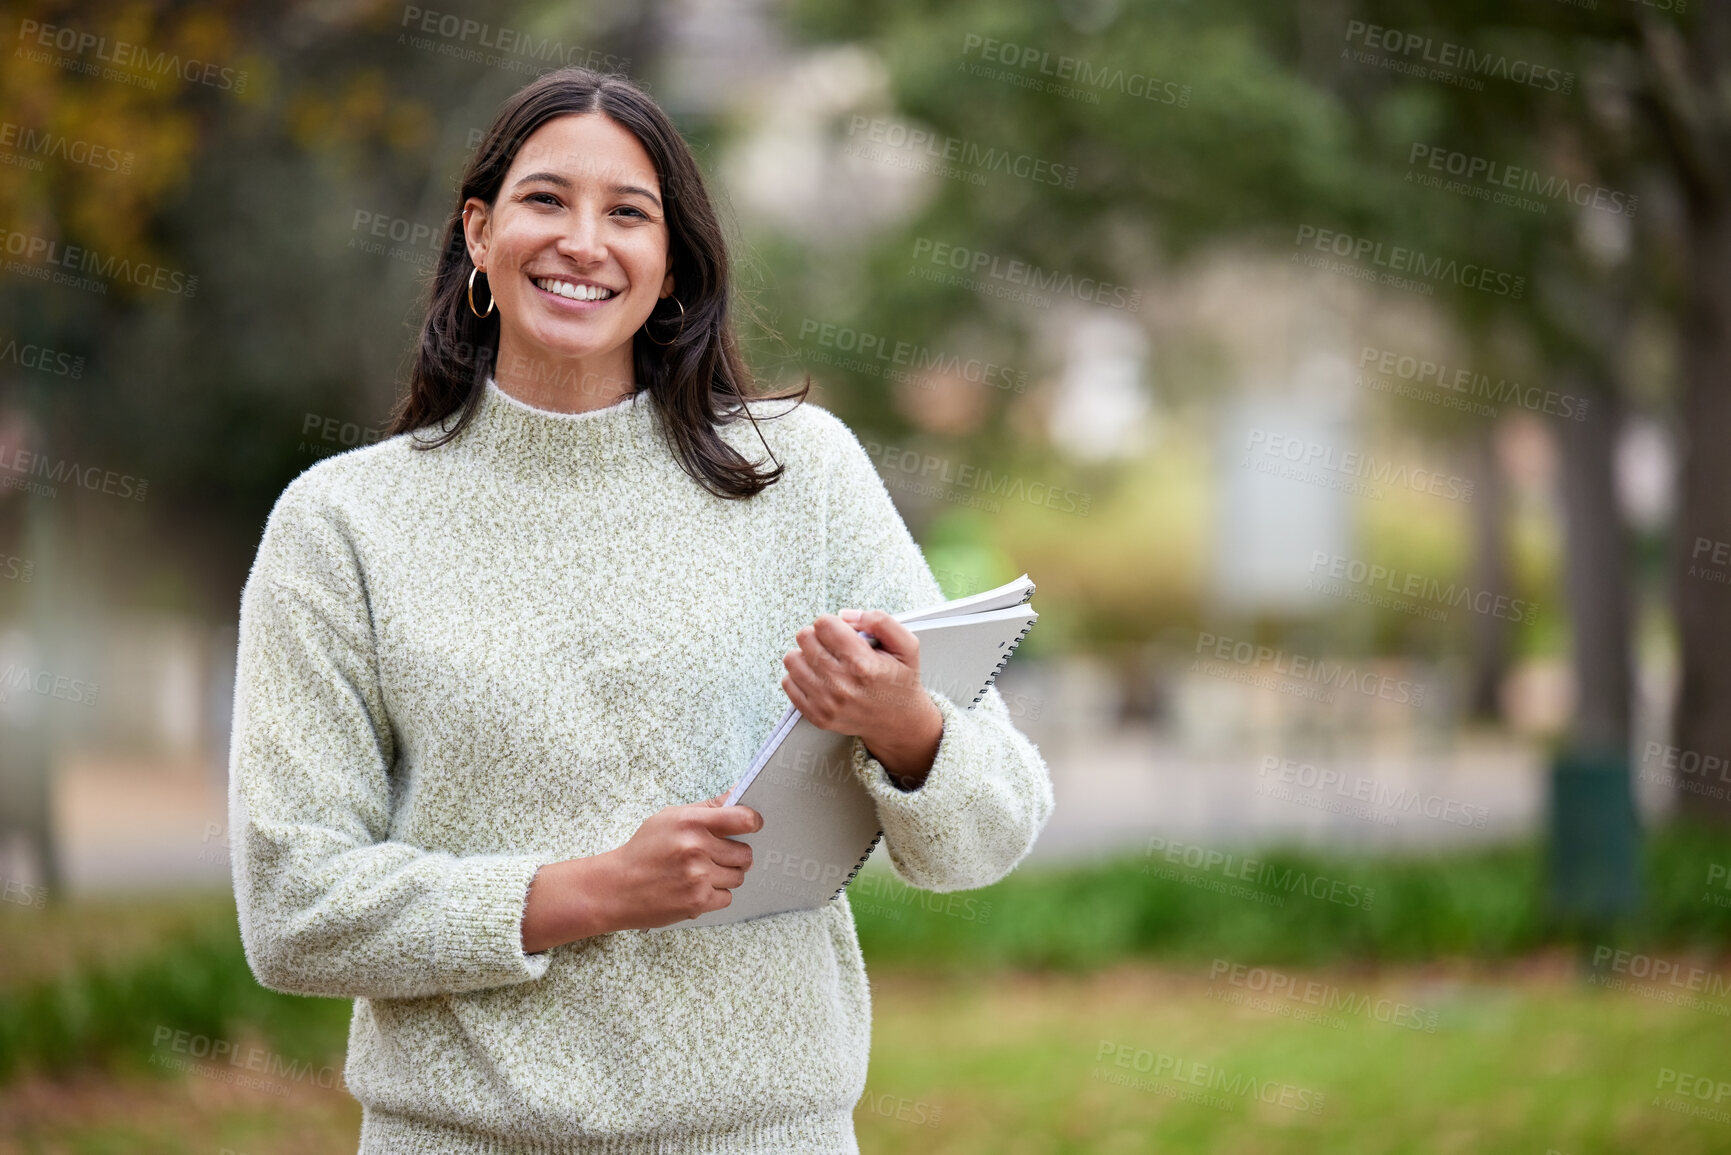 Buy stock photo Portrait of a young woman carrying her schoolbooks outside at college